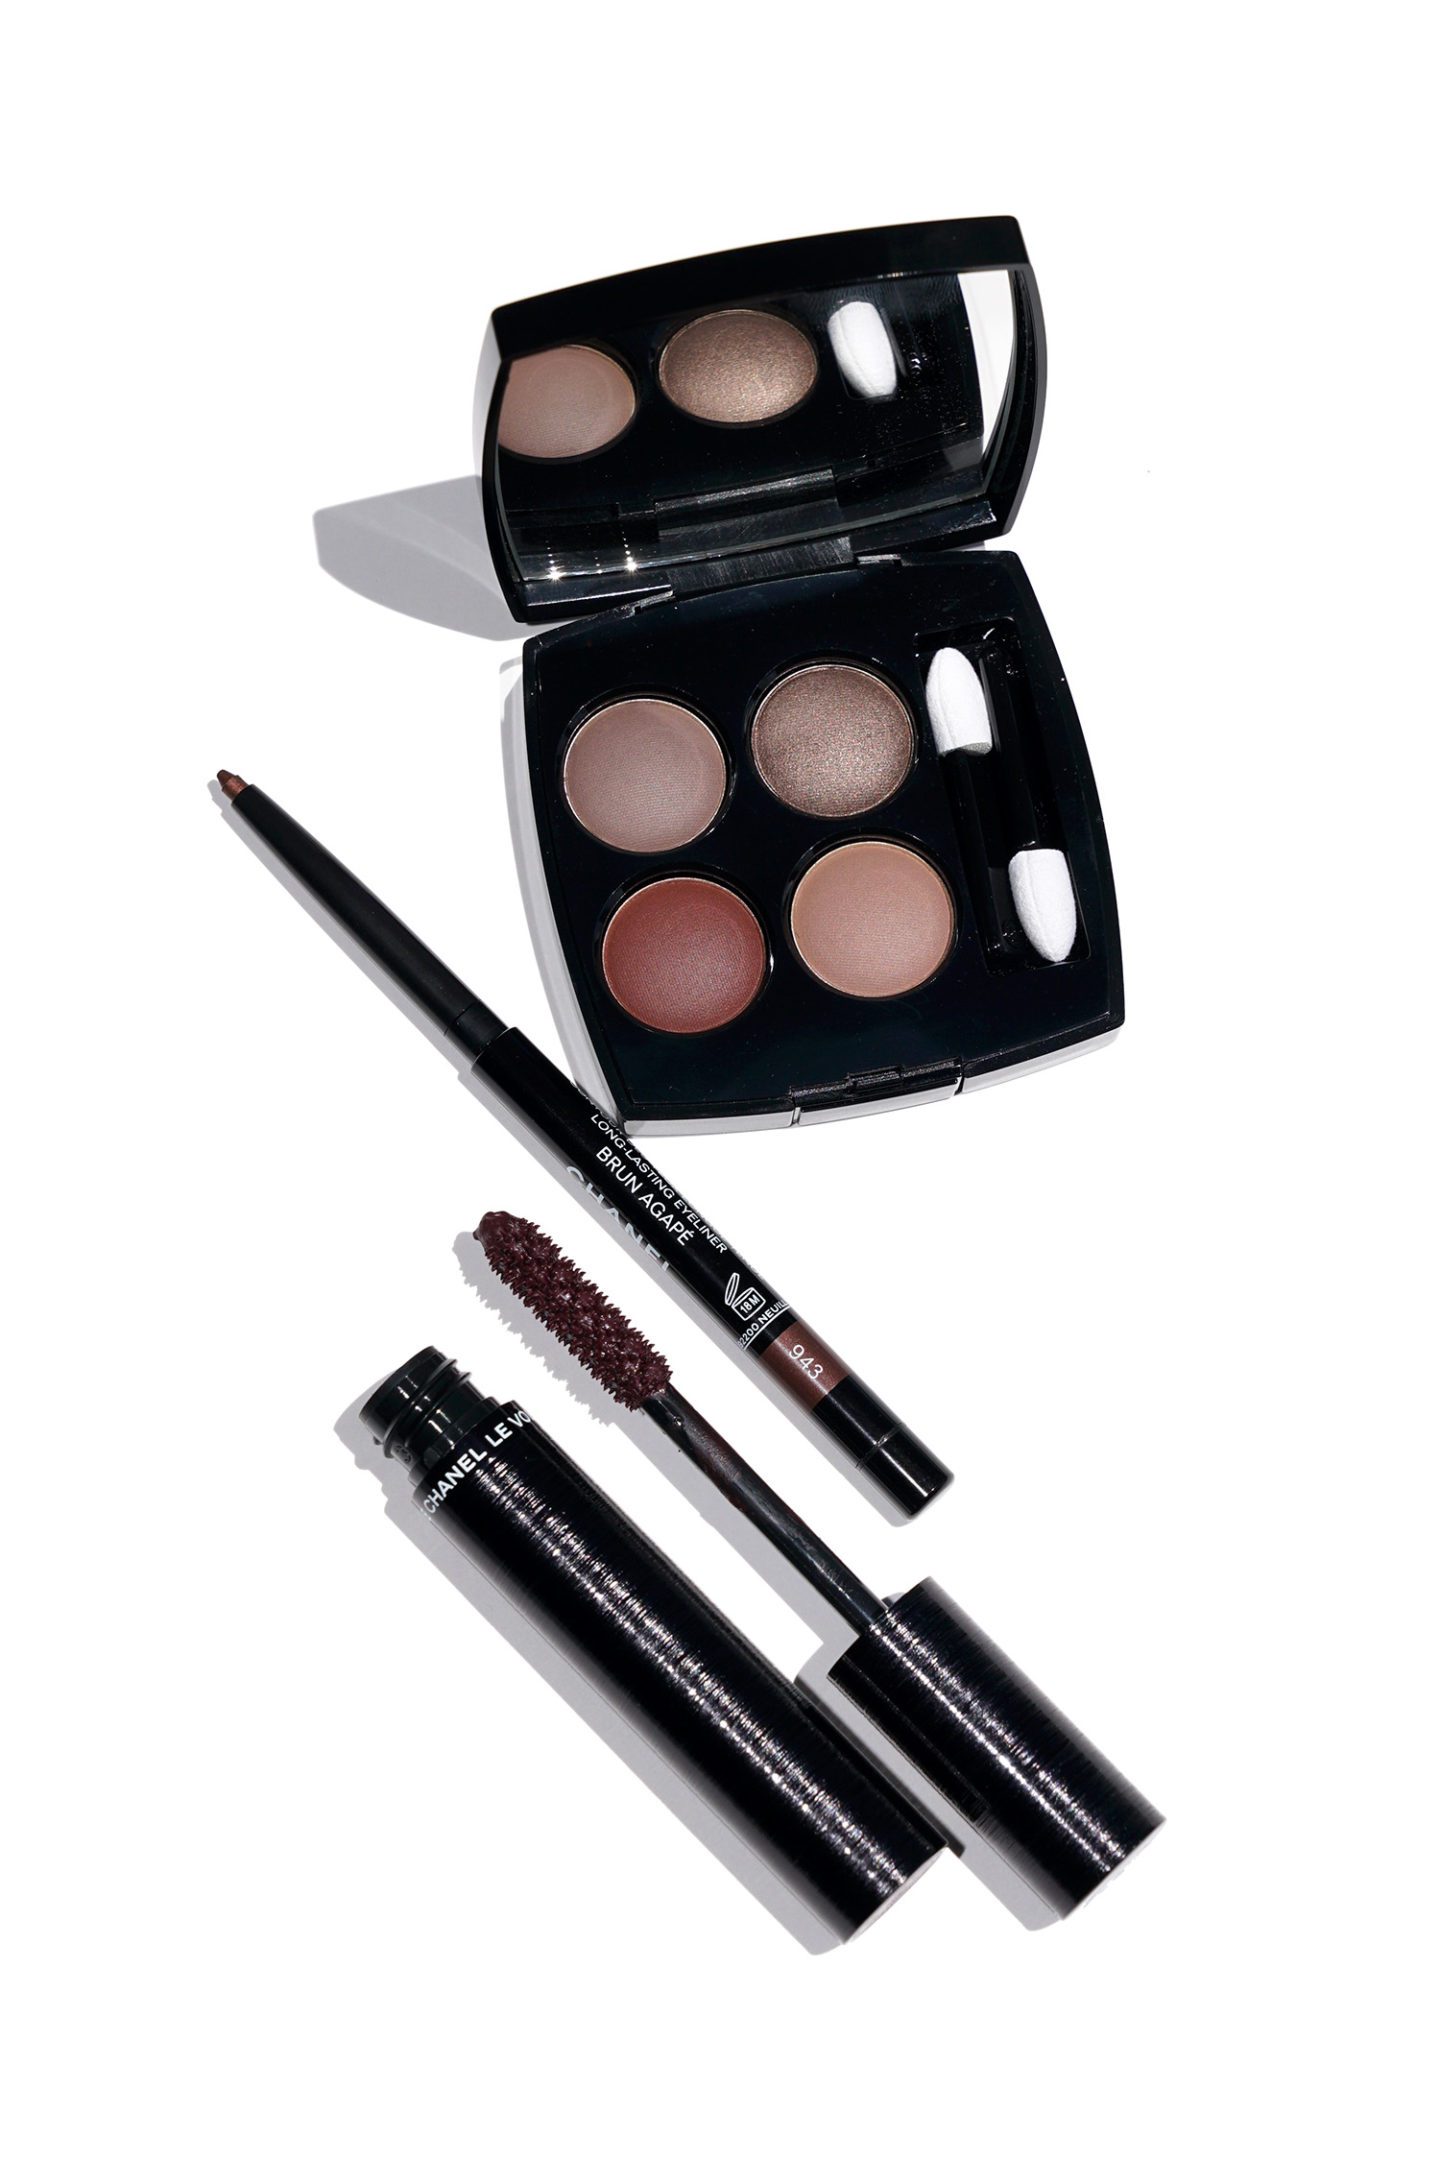 Chanel New Eye Collection Blurry Mauve | The Beauty Look Book